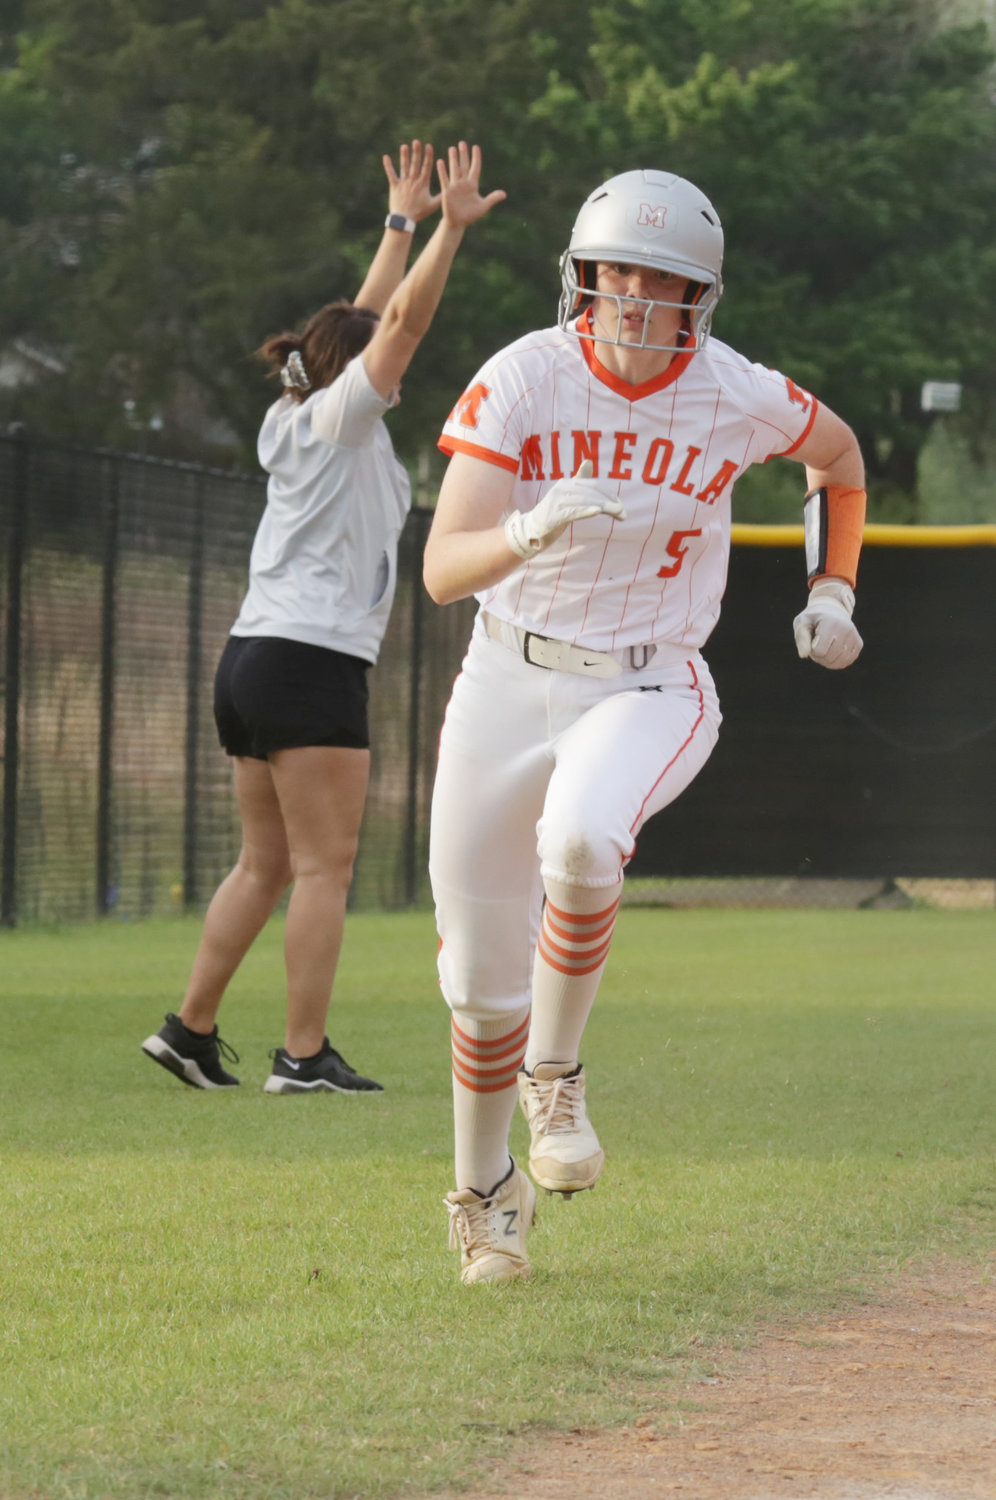 Mineola’s Jadelyn Marshall powers home courtesy a Jaycee Smith stand-up double in the first inning.